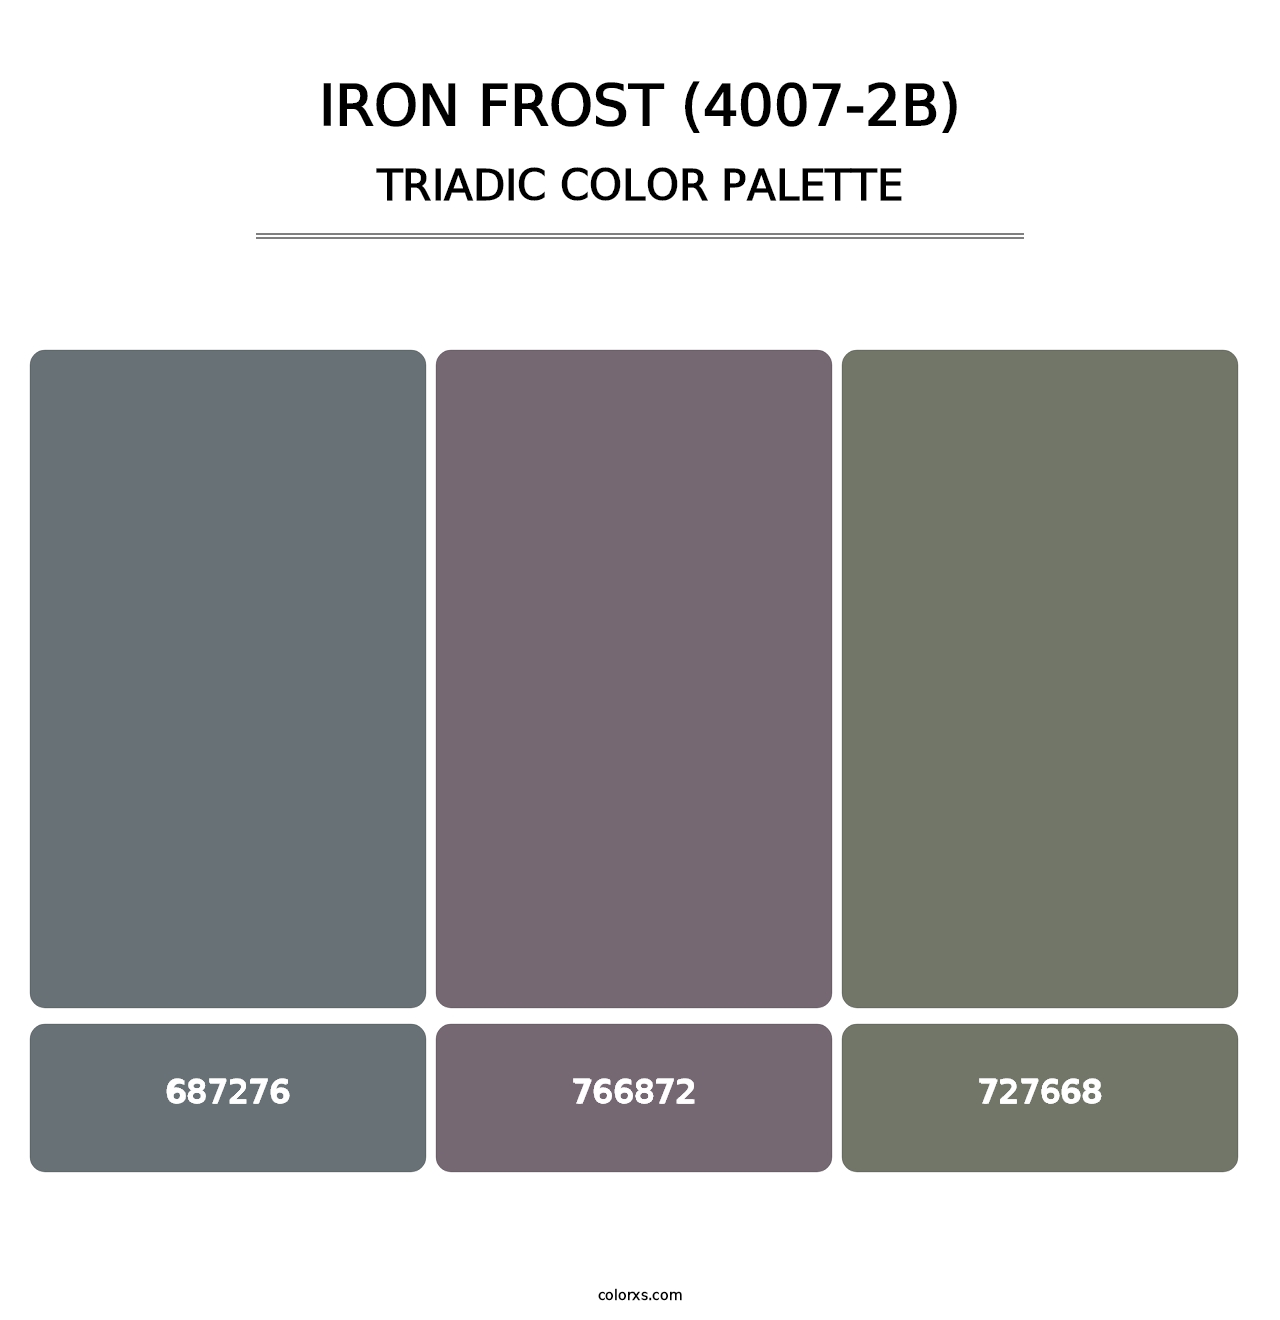 Iron Frost (4007-2B) - Triadic Color Palette